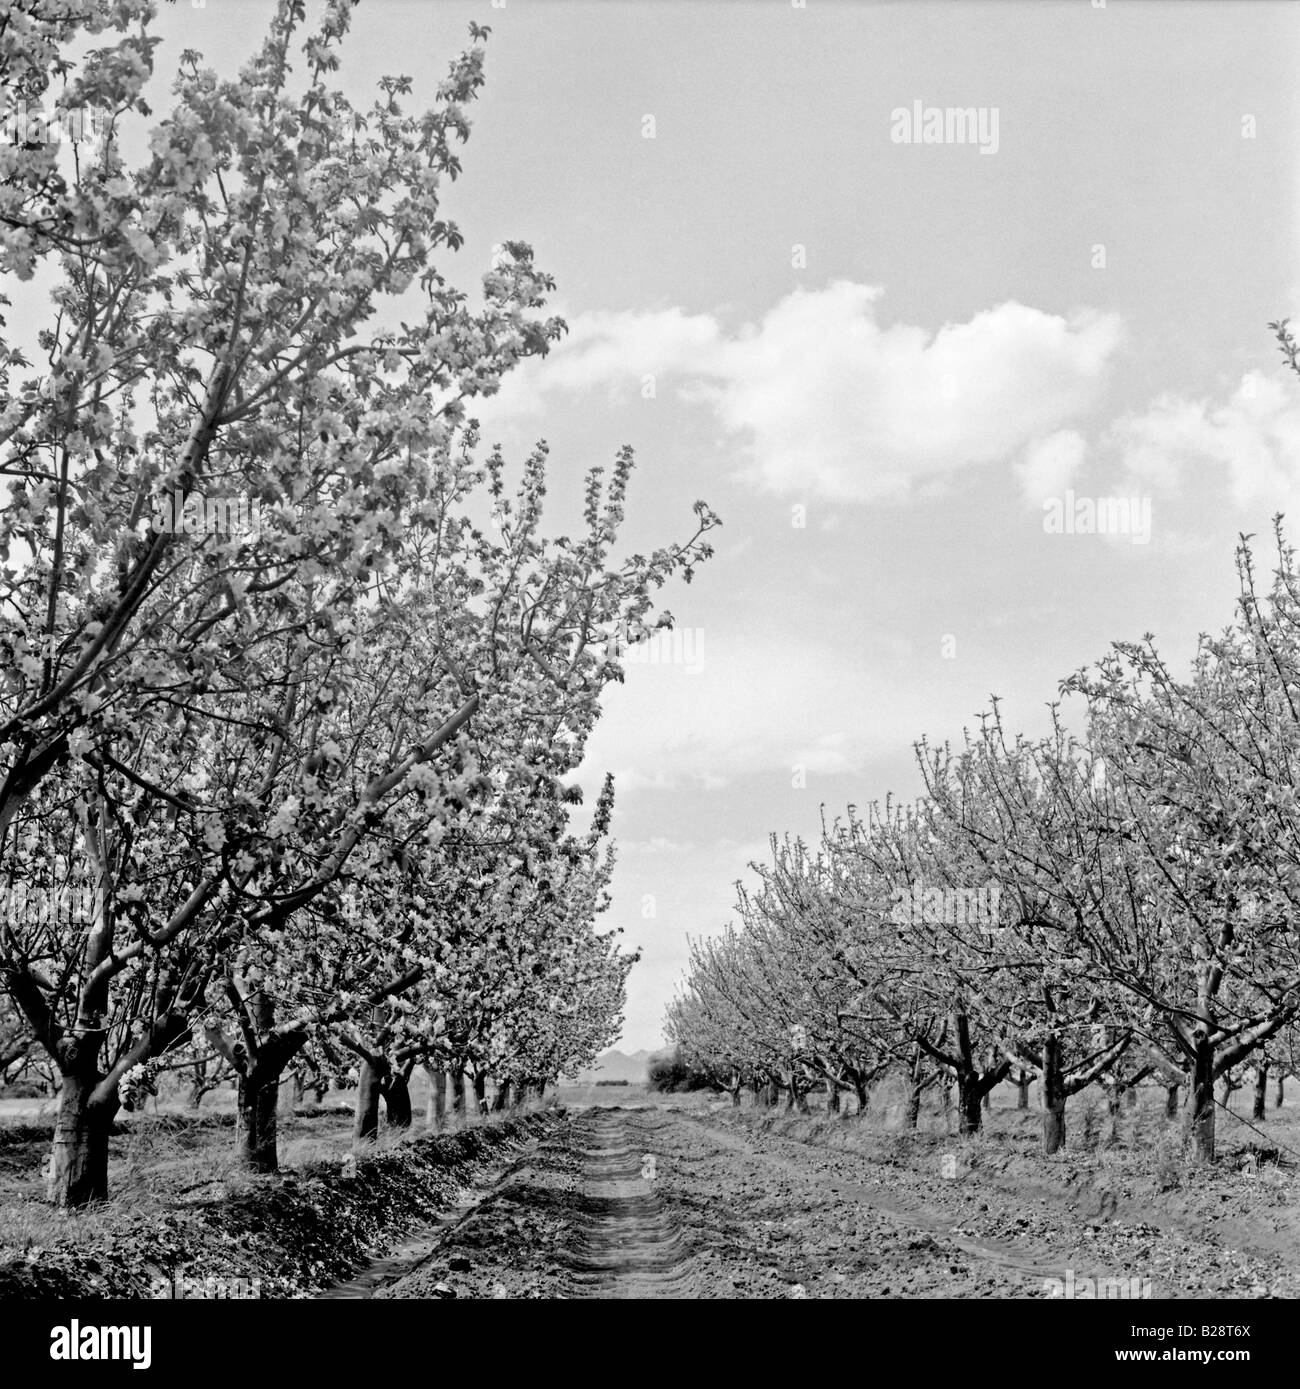 orchard arizona fruit trees rows agriculture farming produce flowering flowers trees fruiting Stock Photo